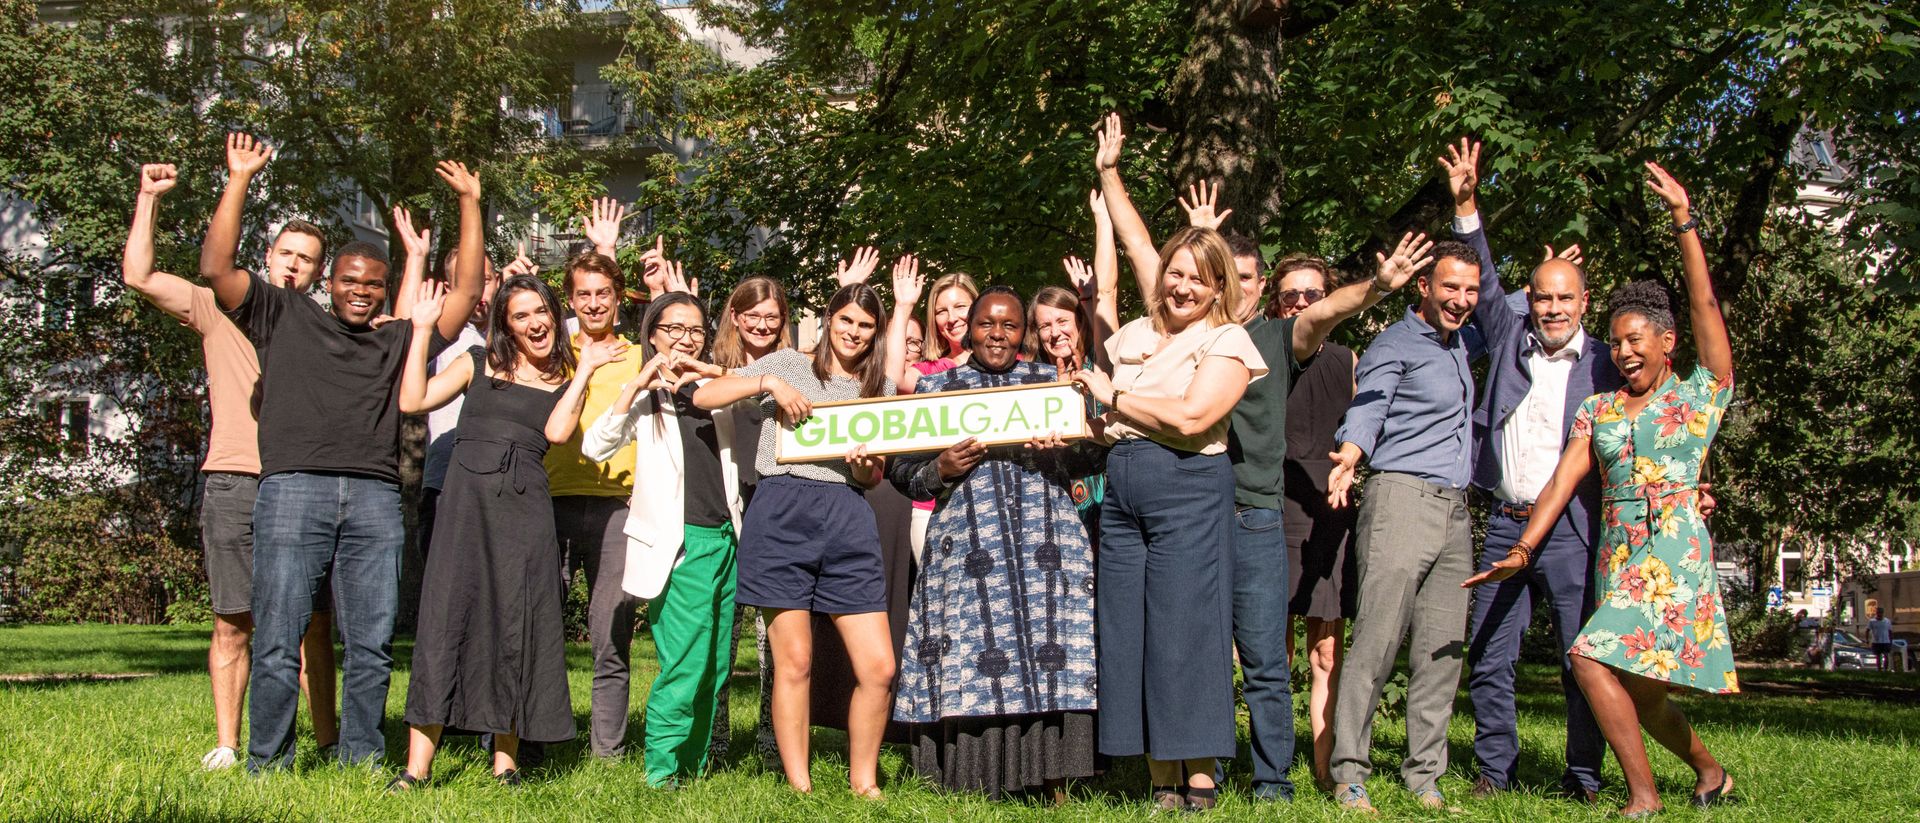 Happy GLOBALG.A.P. team members holding a sign in nature